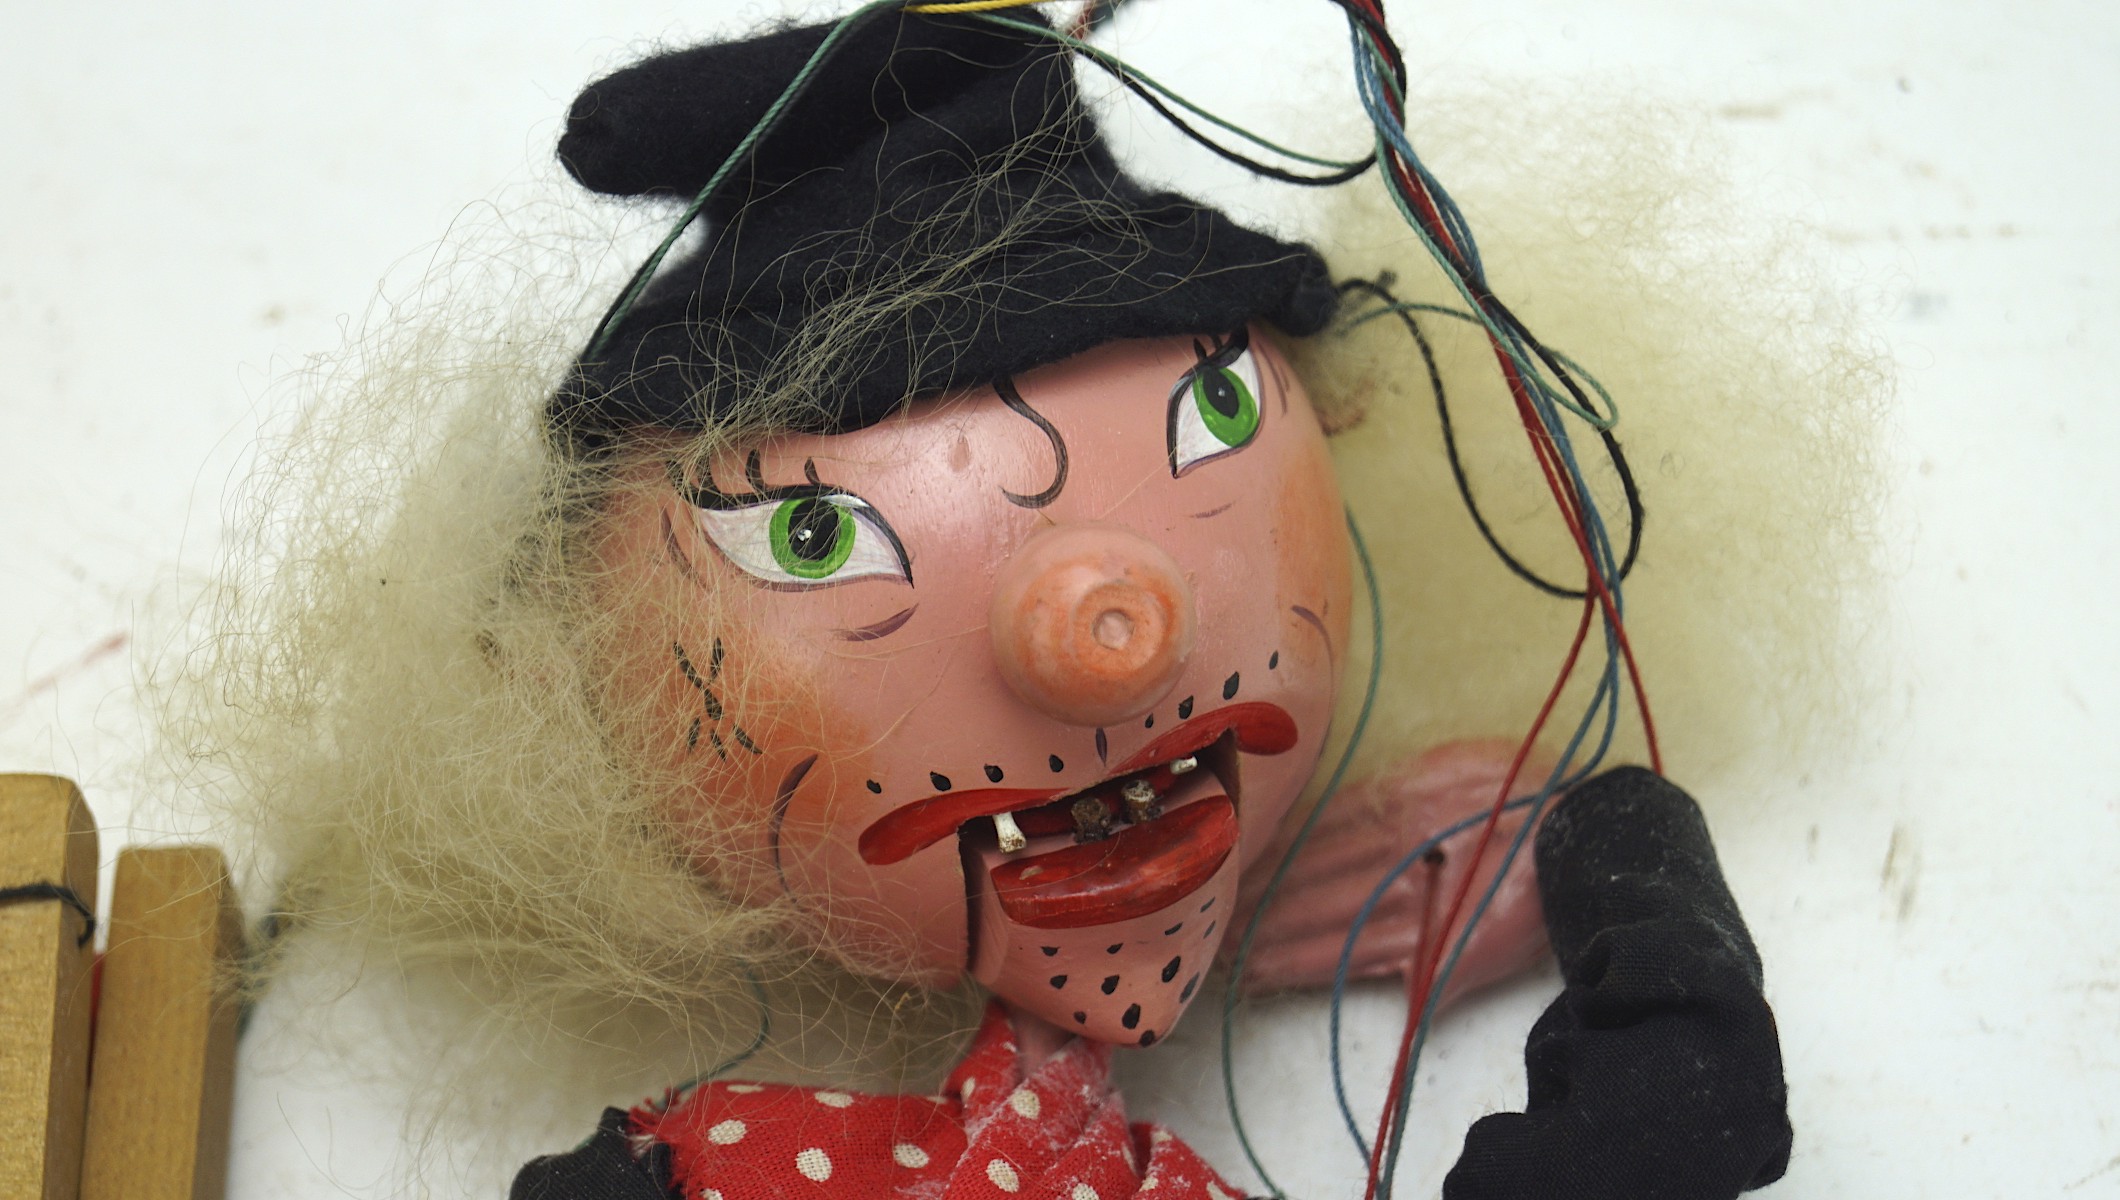 A Pelham puppet of a witch carrying a broom, - Image 2 of 2